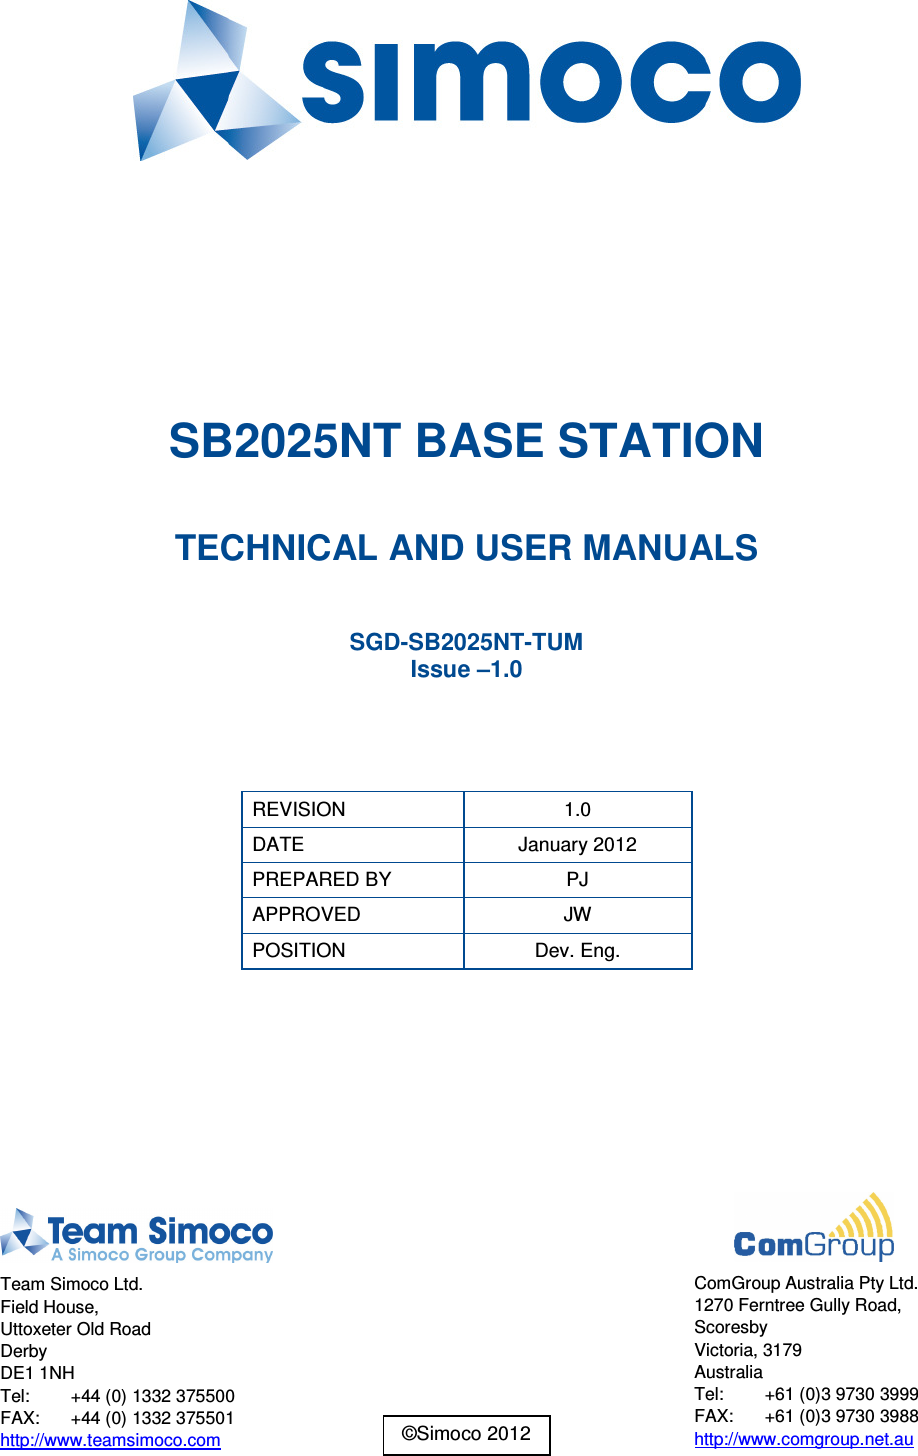        SB2025NT BASE STATION  TECHNICAL AND USER MANUALS  SGD-SB2025NT-TUM Issue –1.0   REVISION  1.0 DATE  January 2012 PREPARED BY  PJ APPROVED  JW POSITION  Dev. Eng.    Team Simoco Ltd. Field House, Uttoxeter Old Road Derby DE1 1NH Tel:  +44 (0) 1332 375500 FAX:  +44 (0) 1332 375501 http://www.teamsimoco.com  ComGroup Australia Pty Ltd. 1270 Ferntree Gully Road, Scoresby Victoria, 3179 Australia Tel:  +61 (0)3 9730 3999 FAX:  +61 (0)3 9730 3988 http://www.comgroup.net.au ©Simoco 2012 